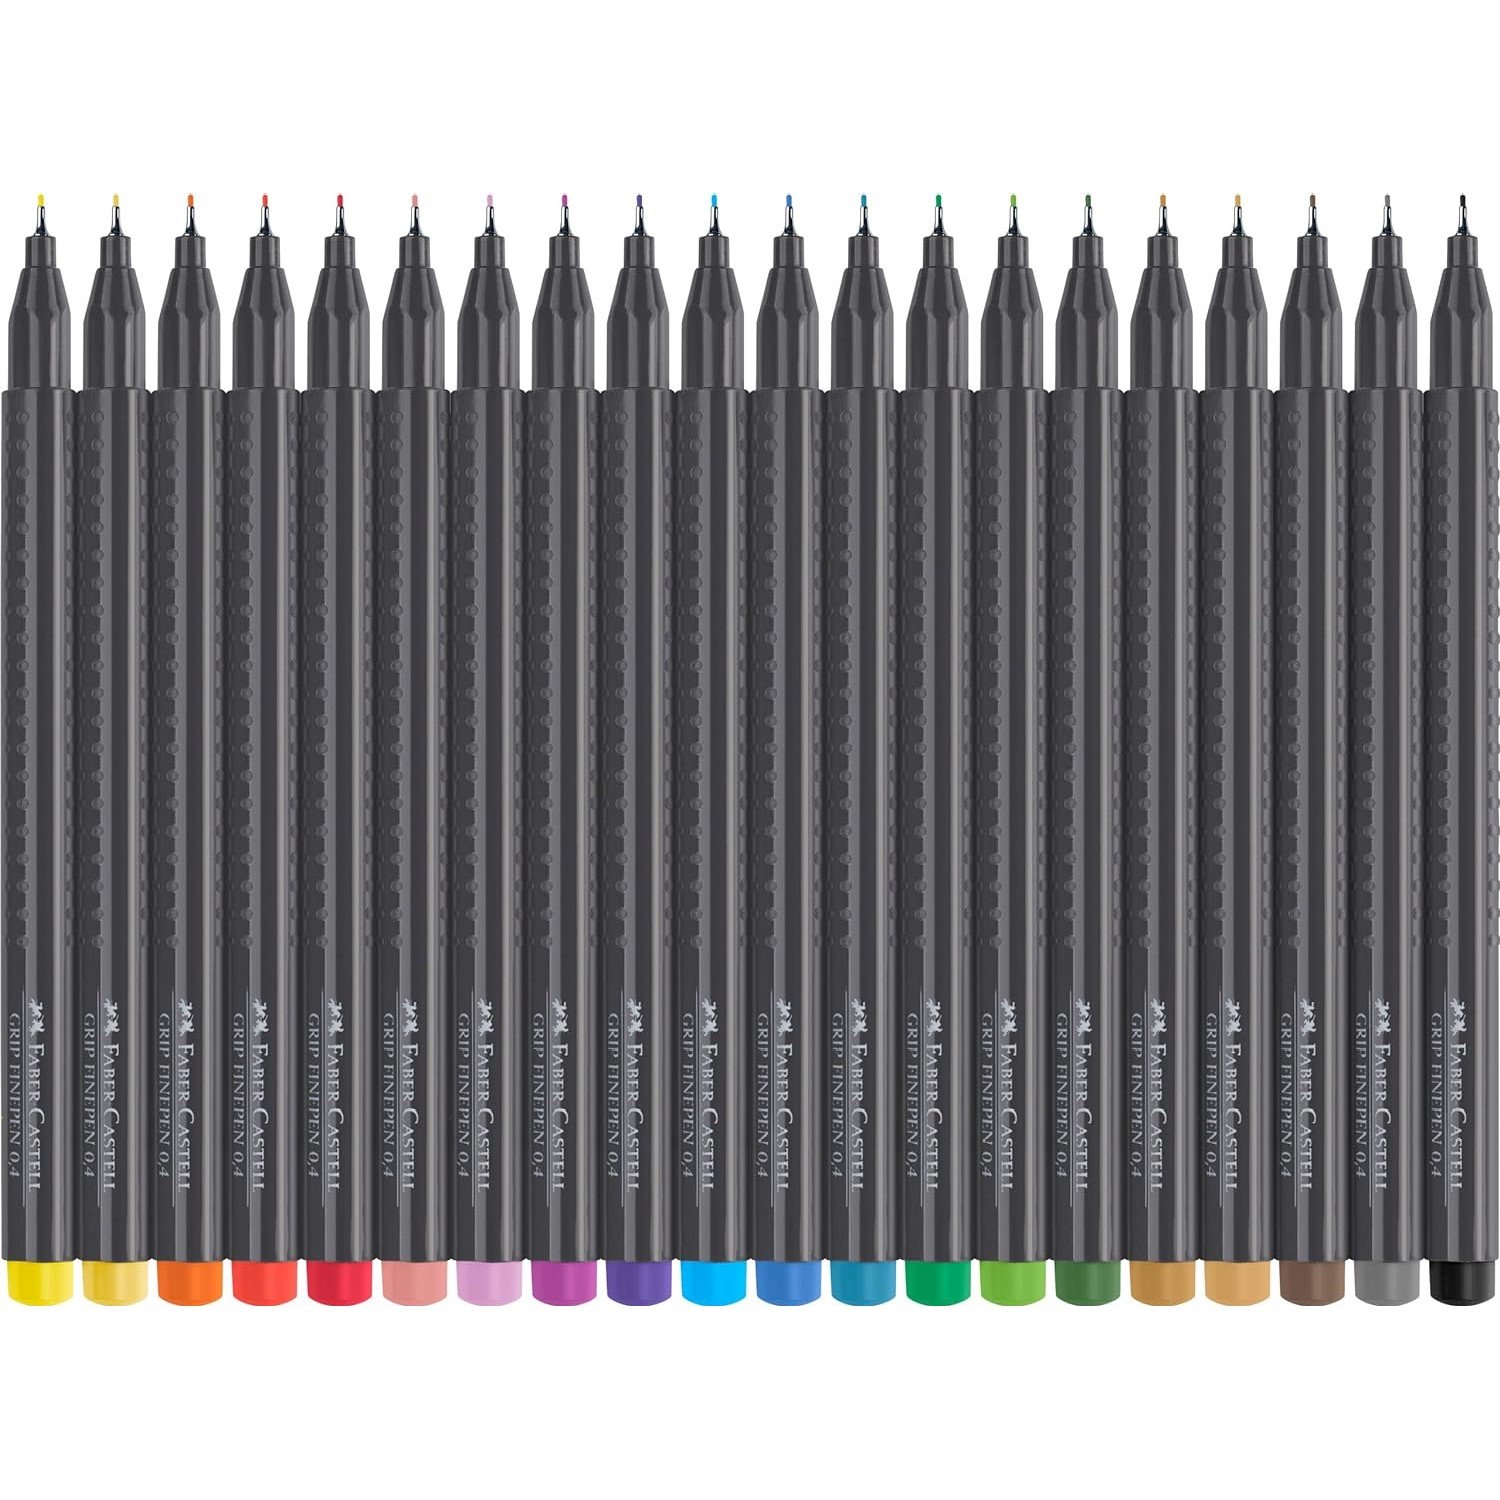 Rotuladores 20 Colores Punta Extrafino 0.4mm Faber Castell